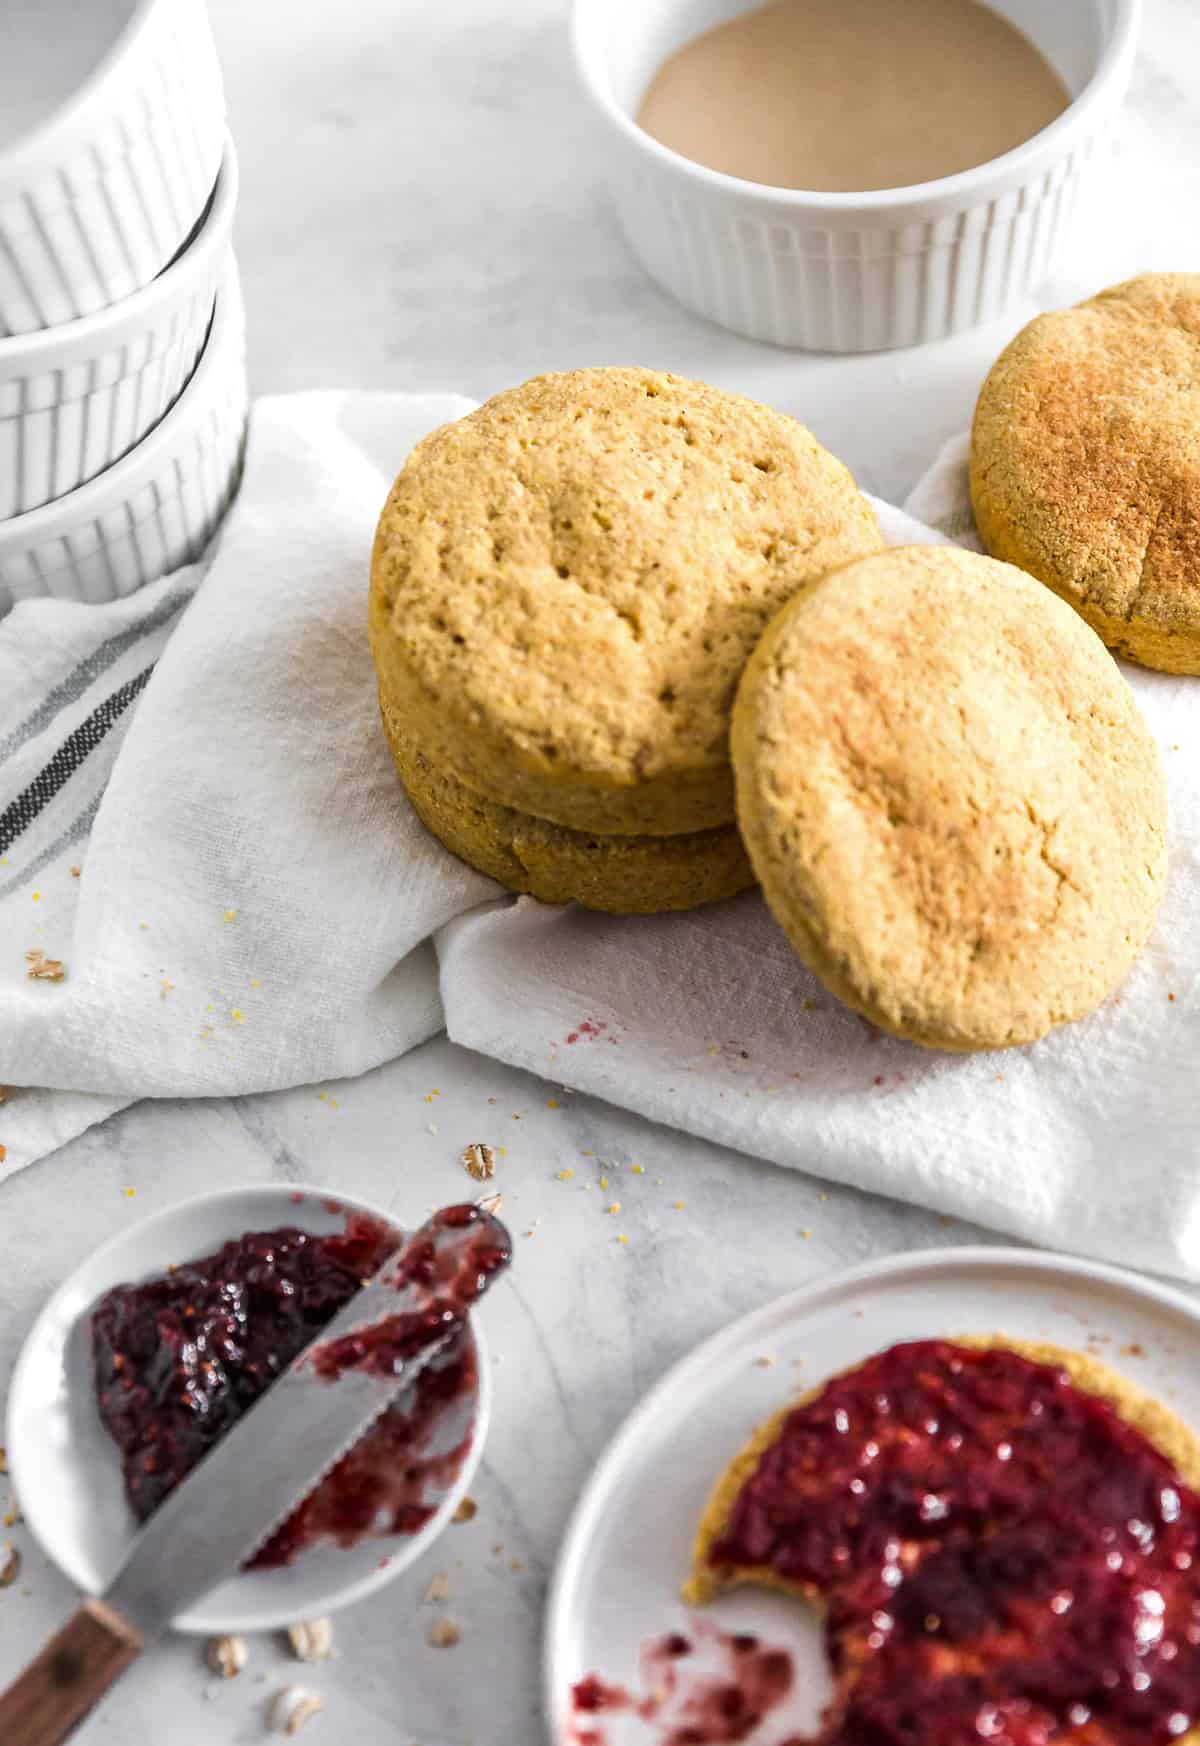 Cornmeal Biscuit, plant based, vegan, vegetarian, whole food plant based, gluten free, recipe, wfpb, healthy, healthy vegan, oil free, no refined sugar, no oil, refined sugar free, dairy free, cornmeal, biscuit, bread, english muffin, easy recipe, fast recipe, sides, breakfast